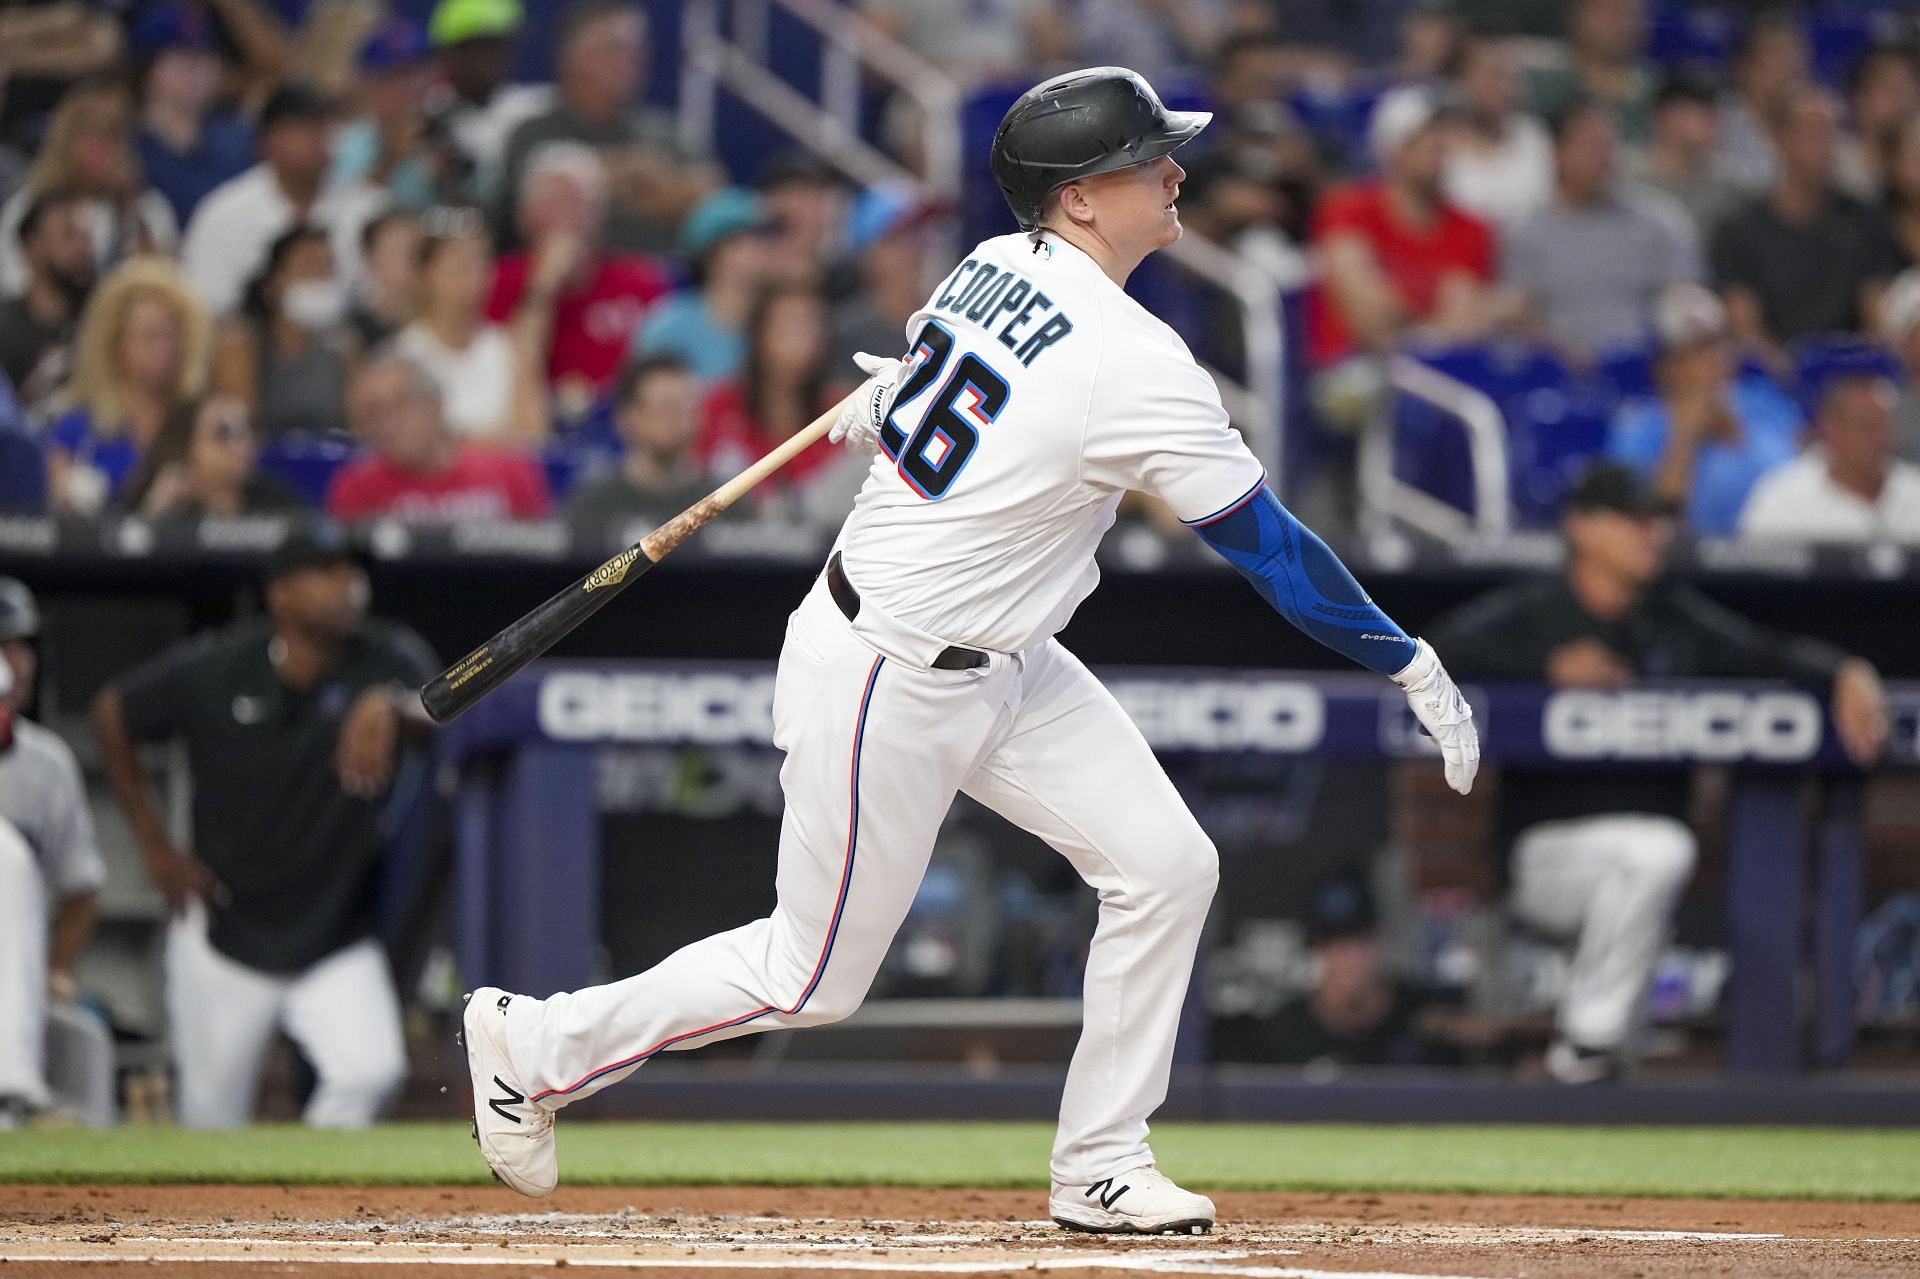 Garrett Cooper bats for the Miami Marlins against the New York Yankees.